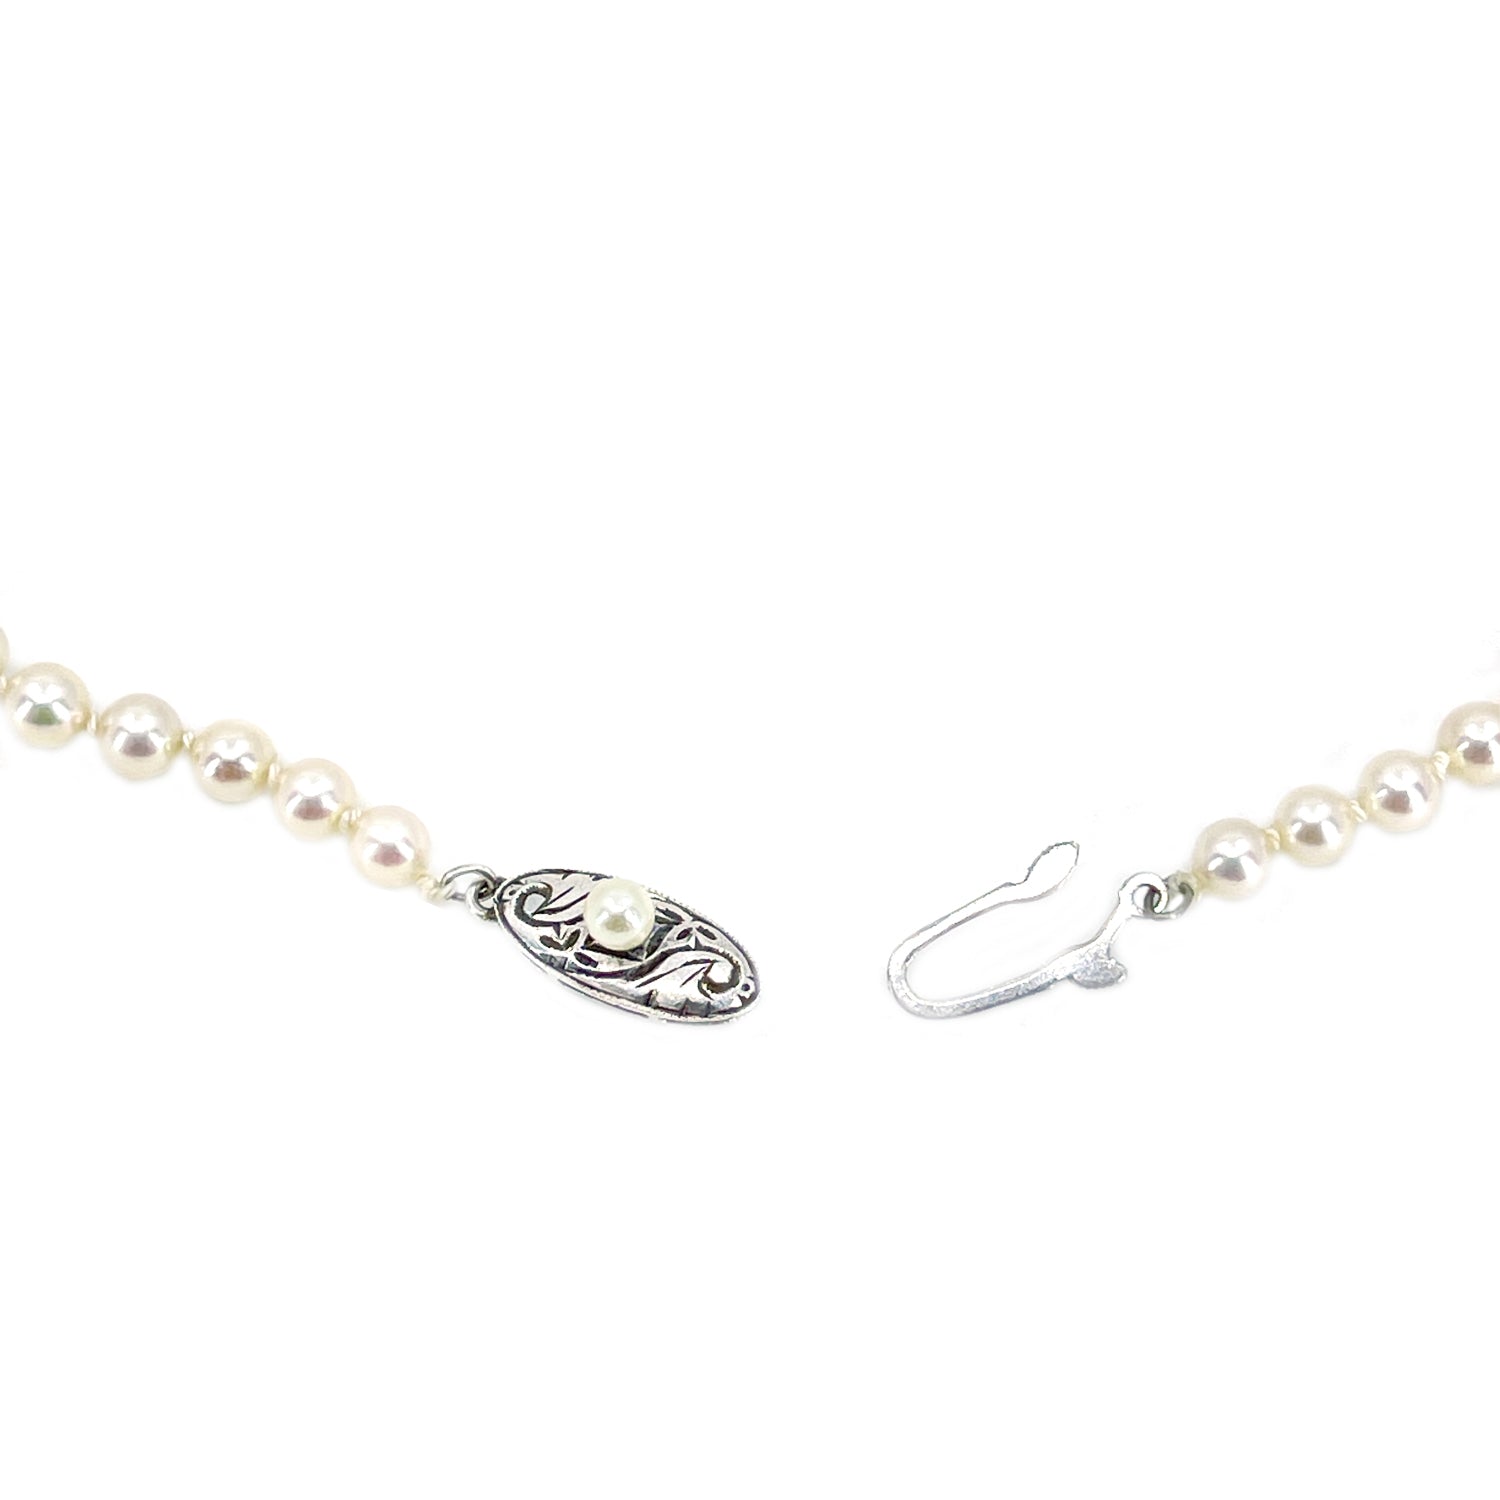 Vintage Art Deco Japanese Saltwater Cultured Akoya Pearl Graduated Necklace - Sterling Silver 19.75 Inch